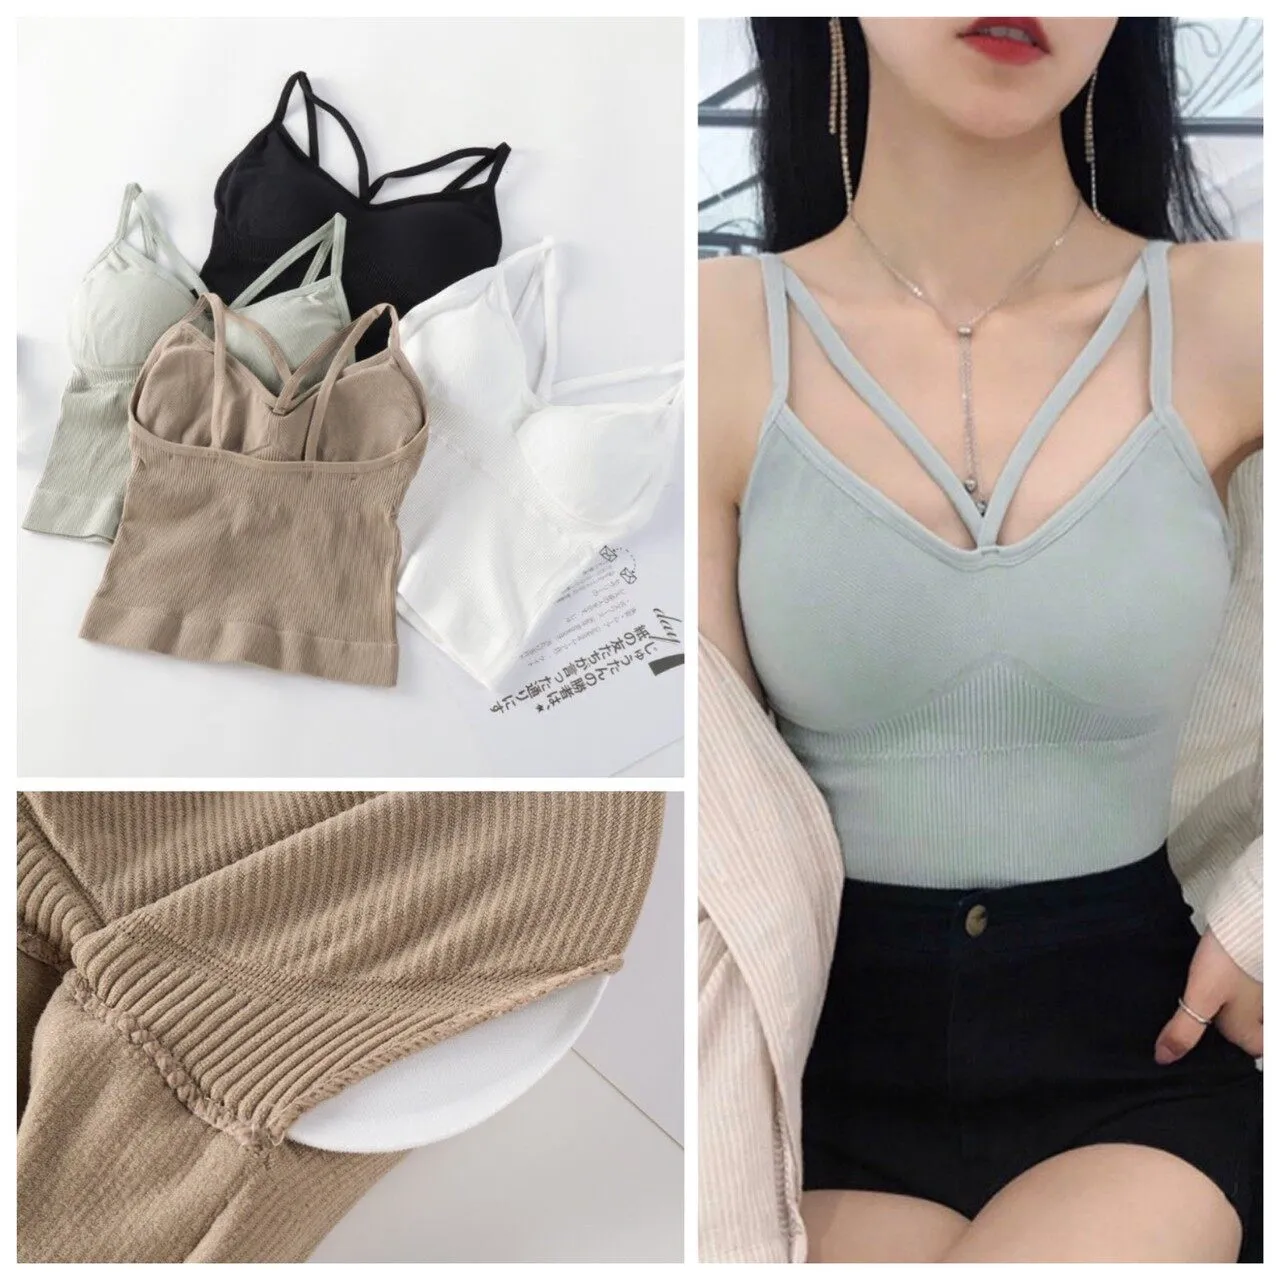 Bra, Single Strap, Cross Face, Good Fabric 🎀, Gallery posted by Jae jae  Review